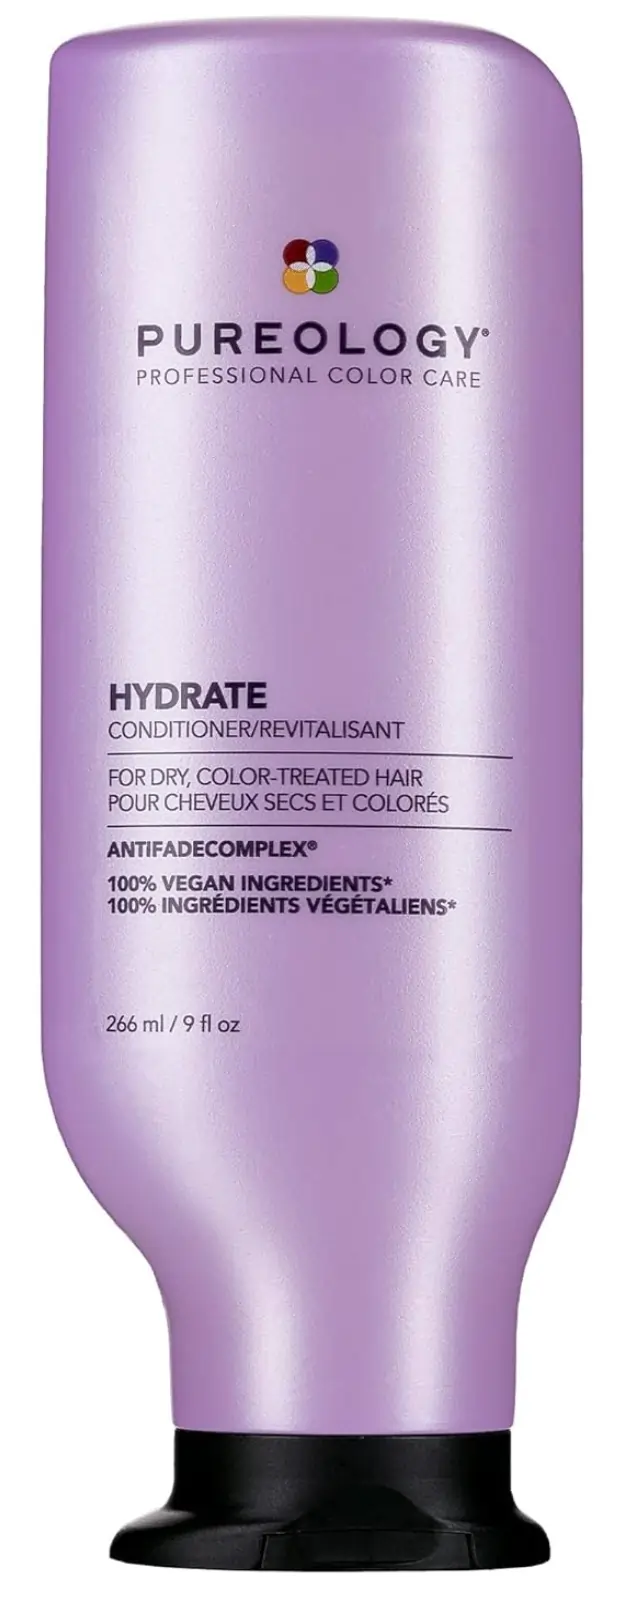 A tied FEMMENORDIC's choice in the Kerastase vs Pureology conditioner comparison, Pureology Hydrate Conditioner.